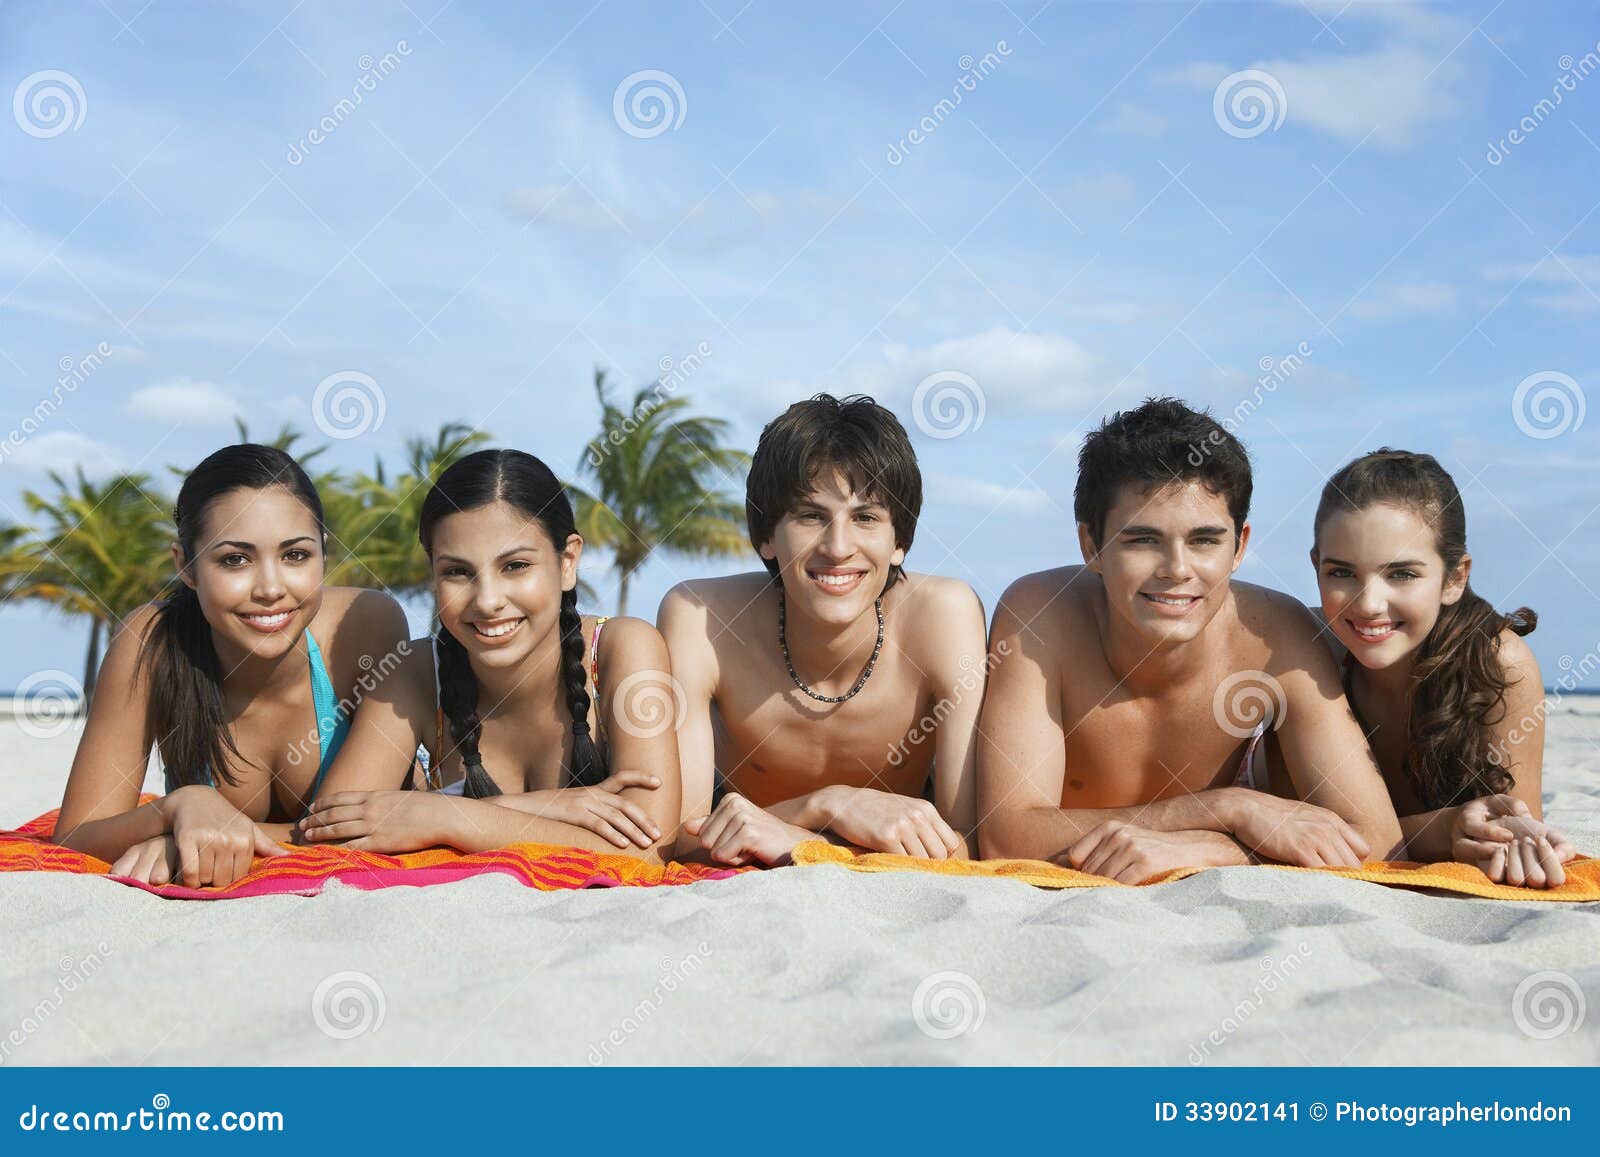 Lying On The Beach With Friends